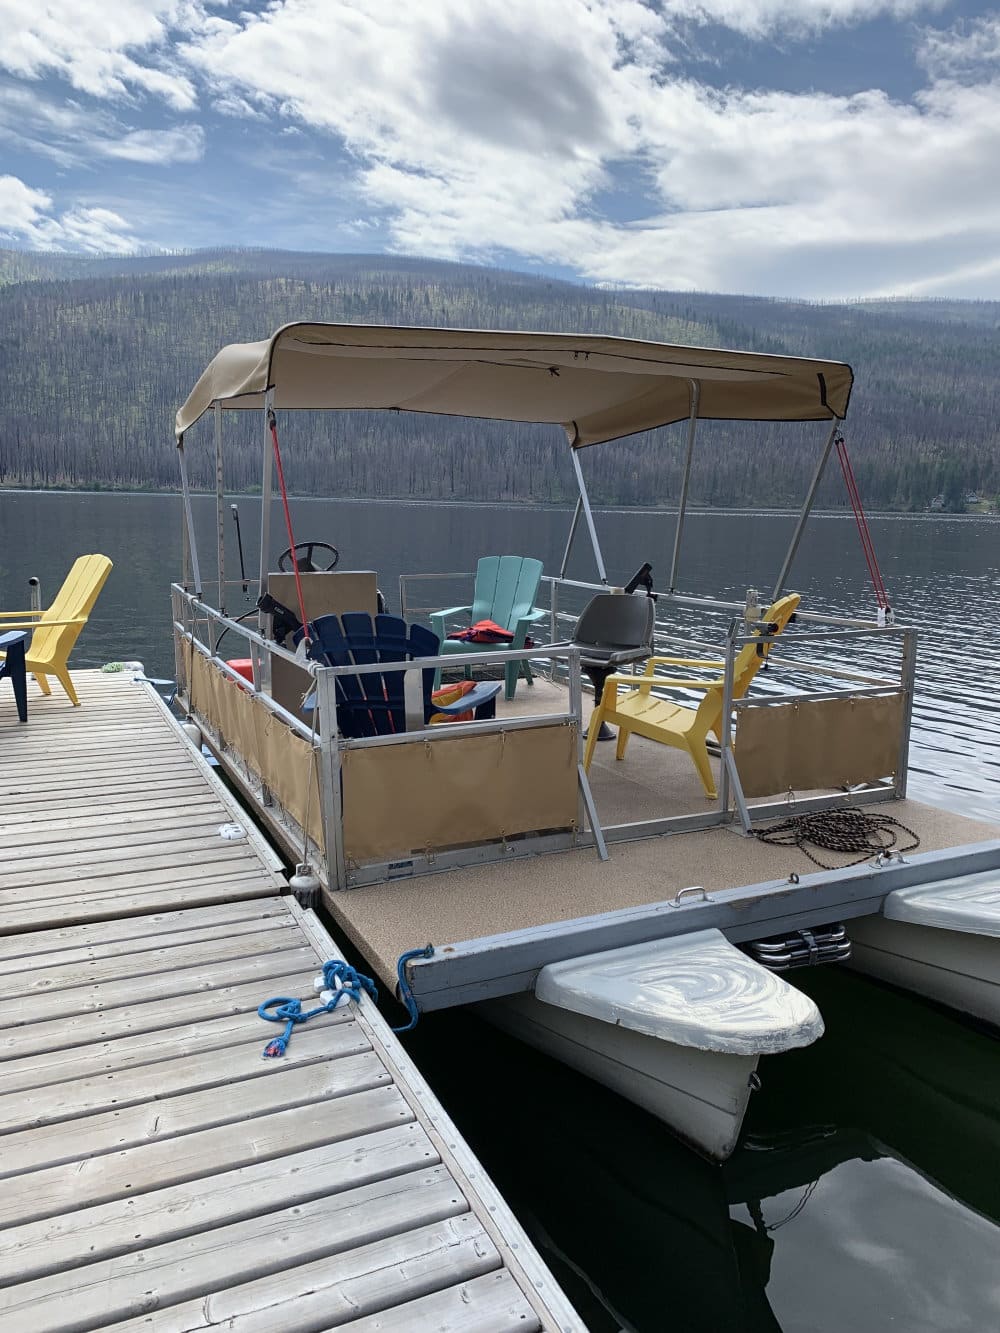 <span  class="uc_style_uc_tiles_grid_image_elementor_uc_items_attribute_title" style="color:#ffffff;">Pontoon boat rental at vacations cabins Loon Lake BC</span>